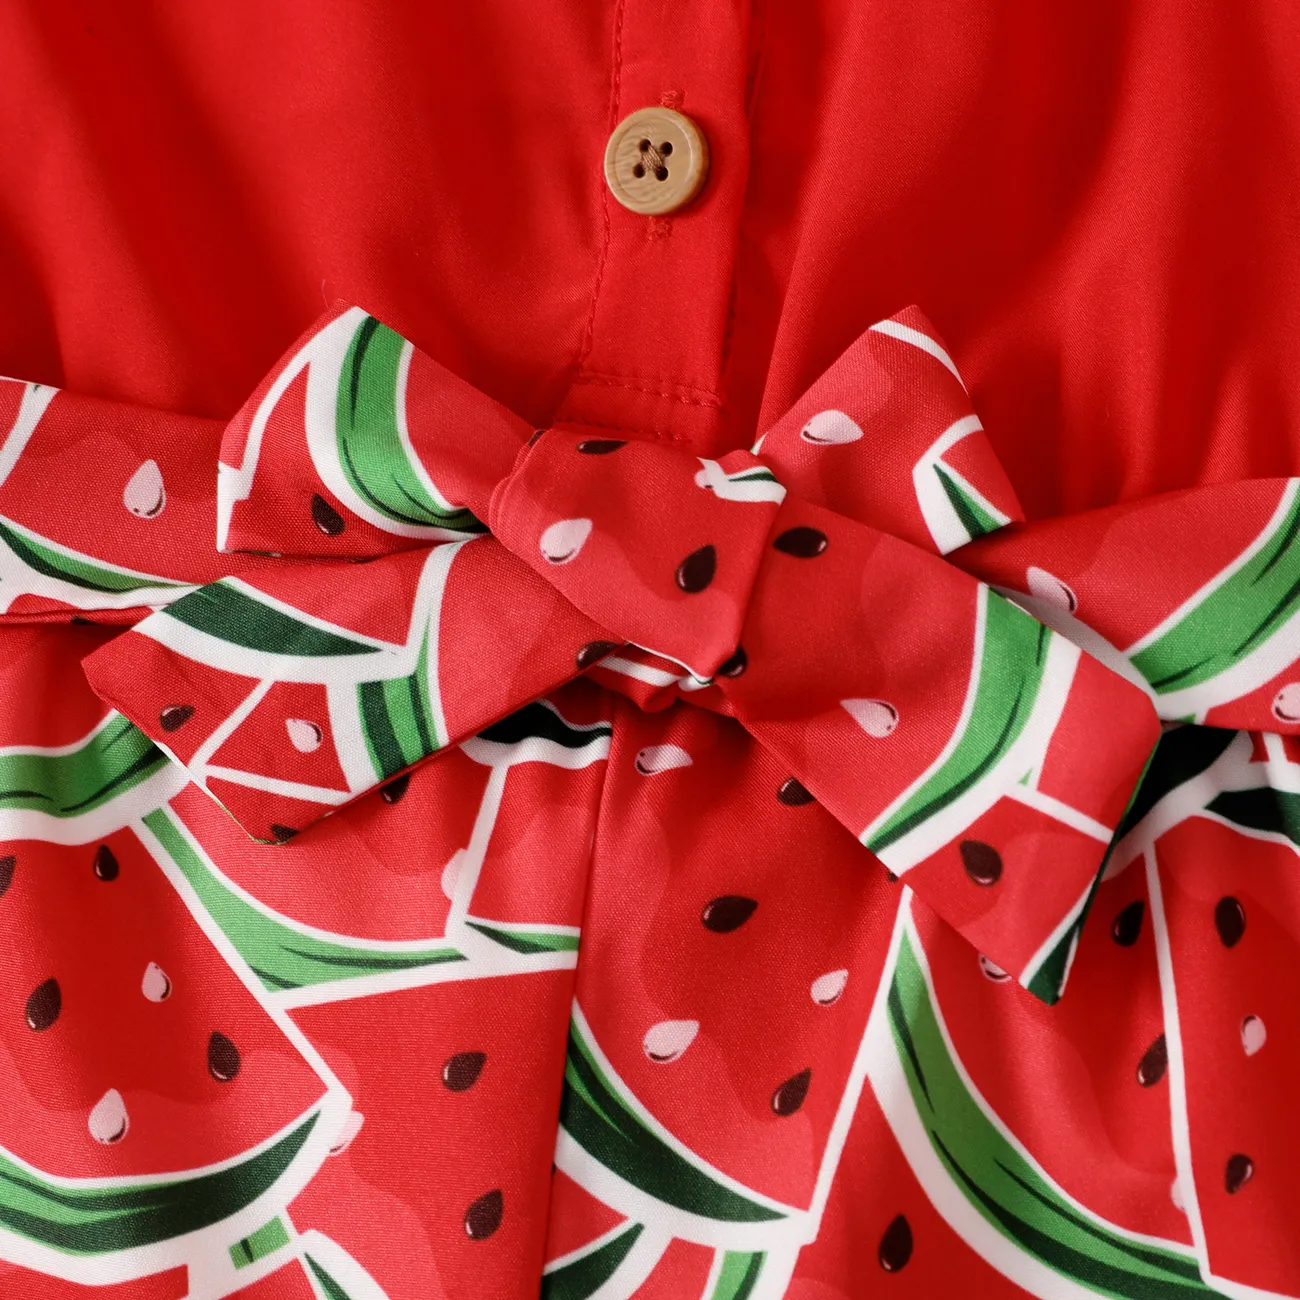 Baby Girl Front Buttons Watermelon Print Ruffle Belted Strappy Romper Red big image 1